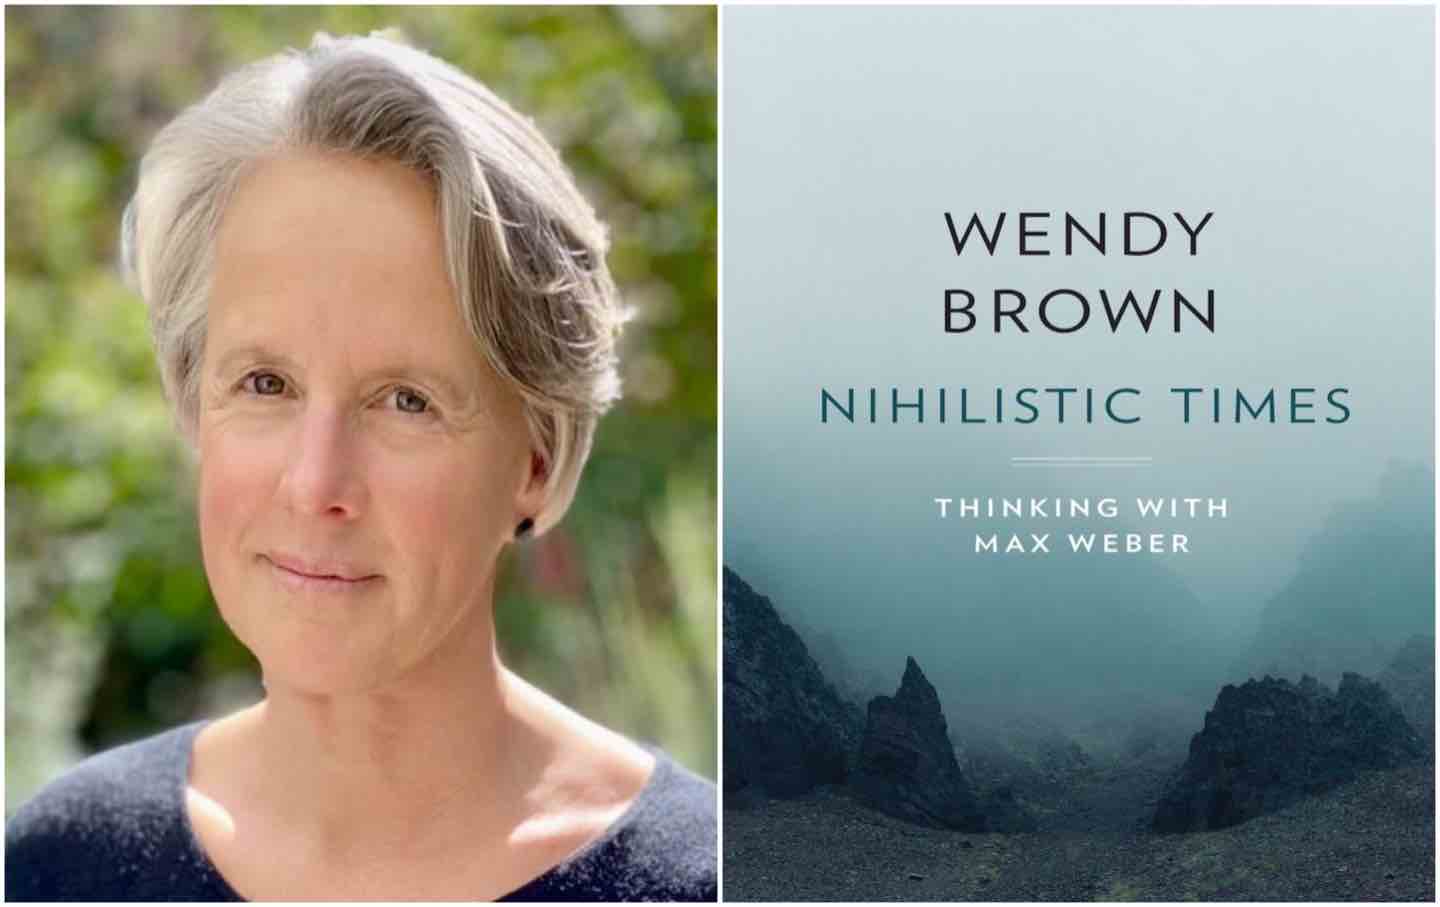 Wendy Brown: A Conversation on Our “Nihilistic” Age